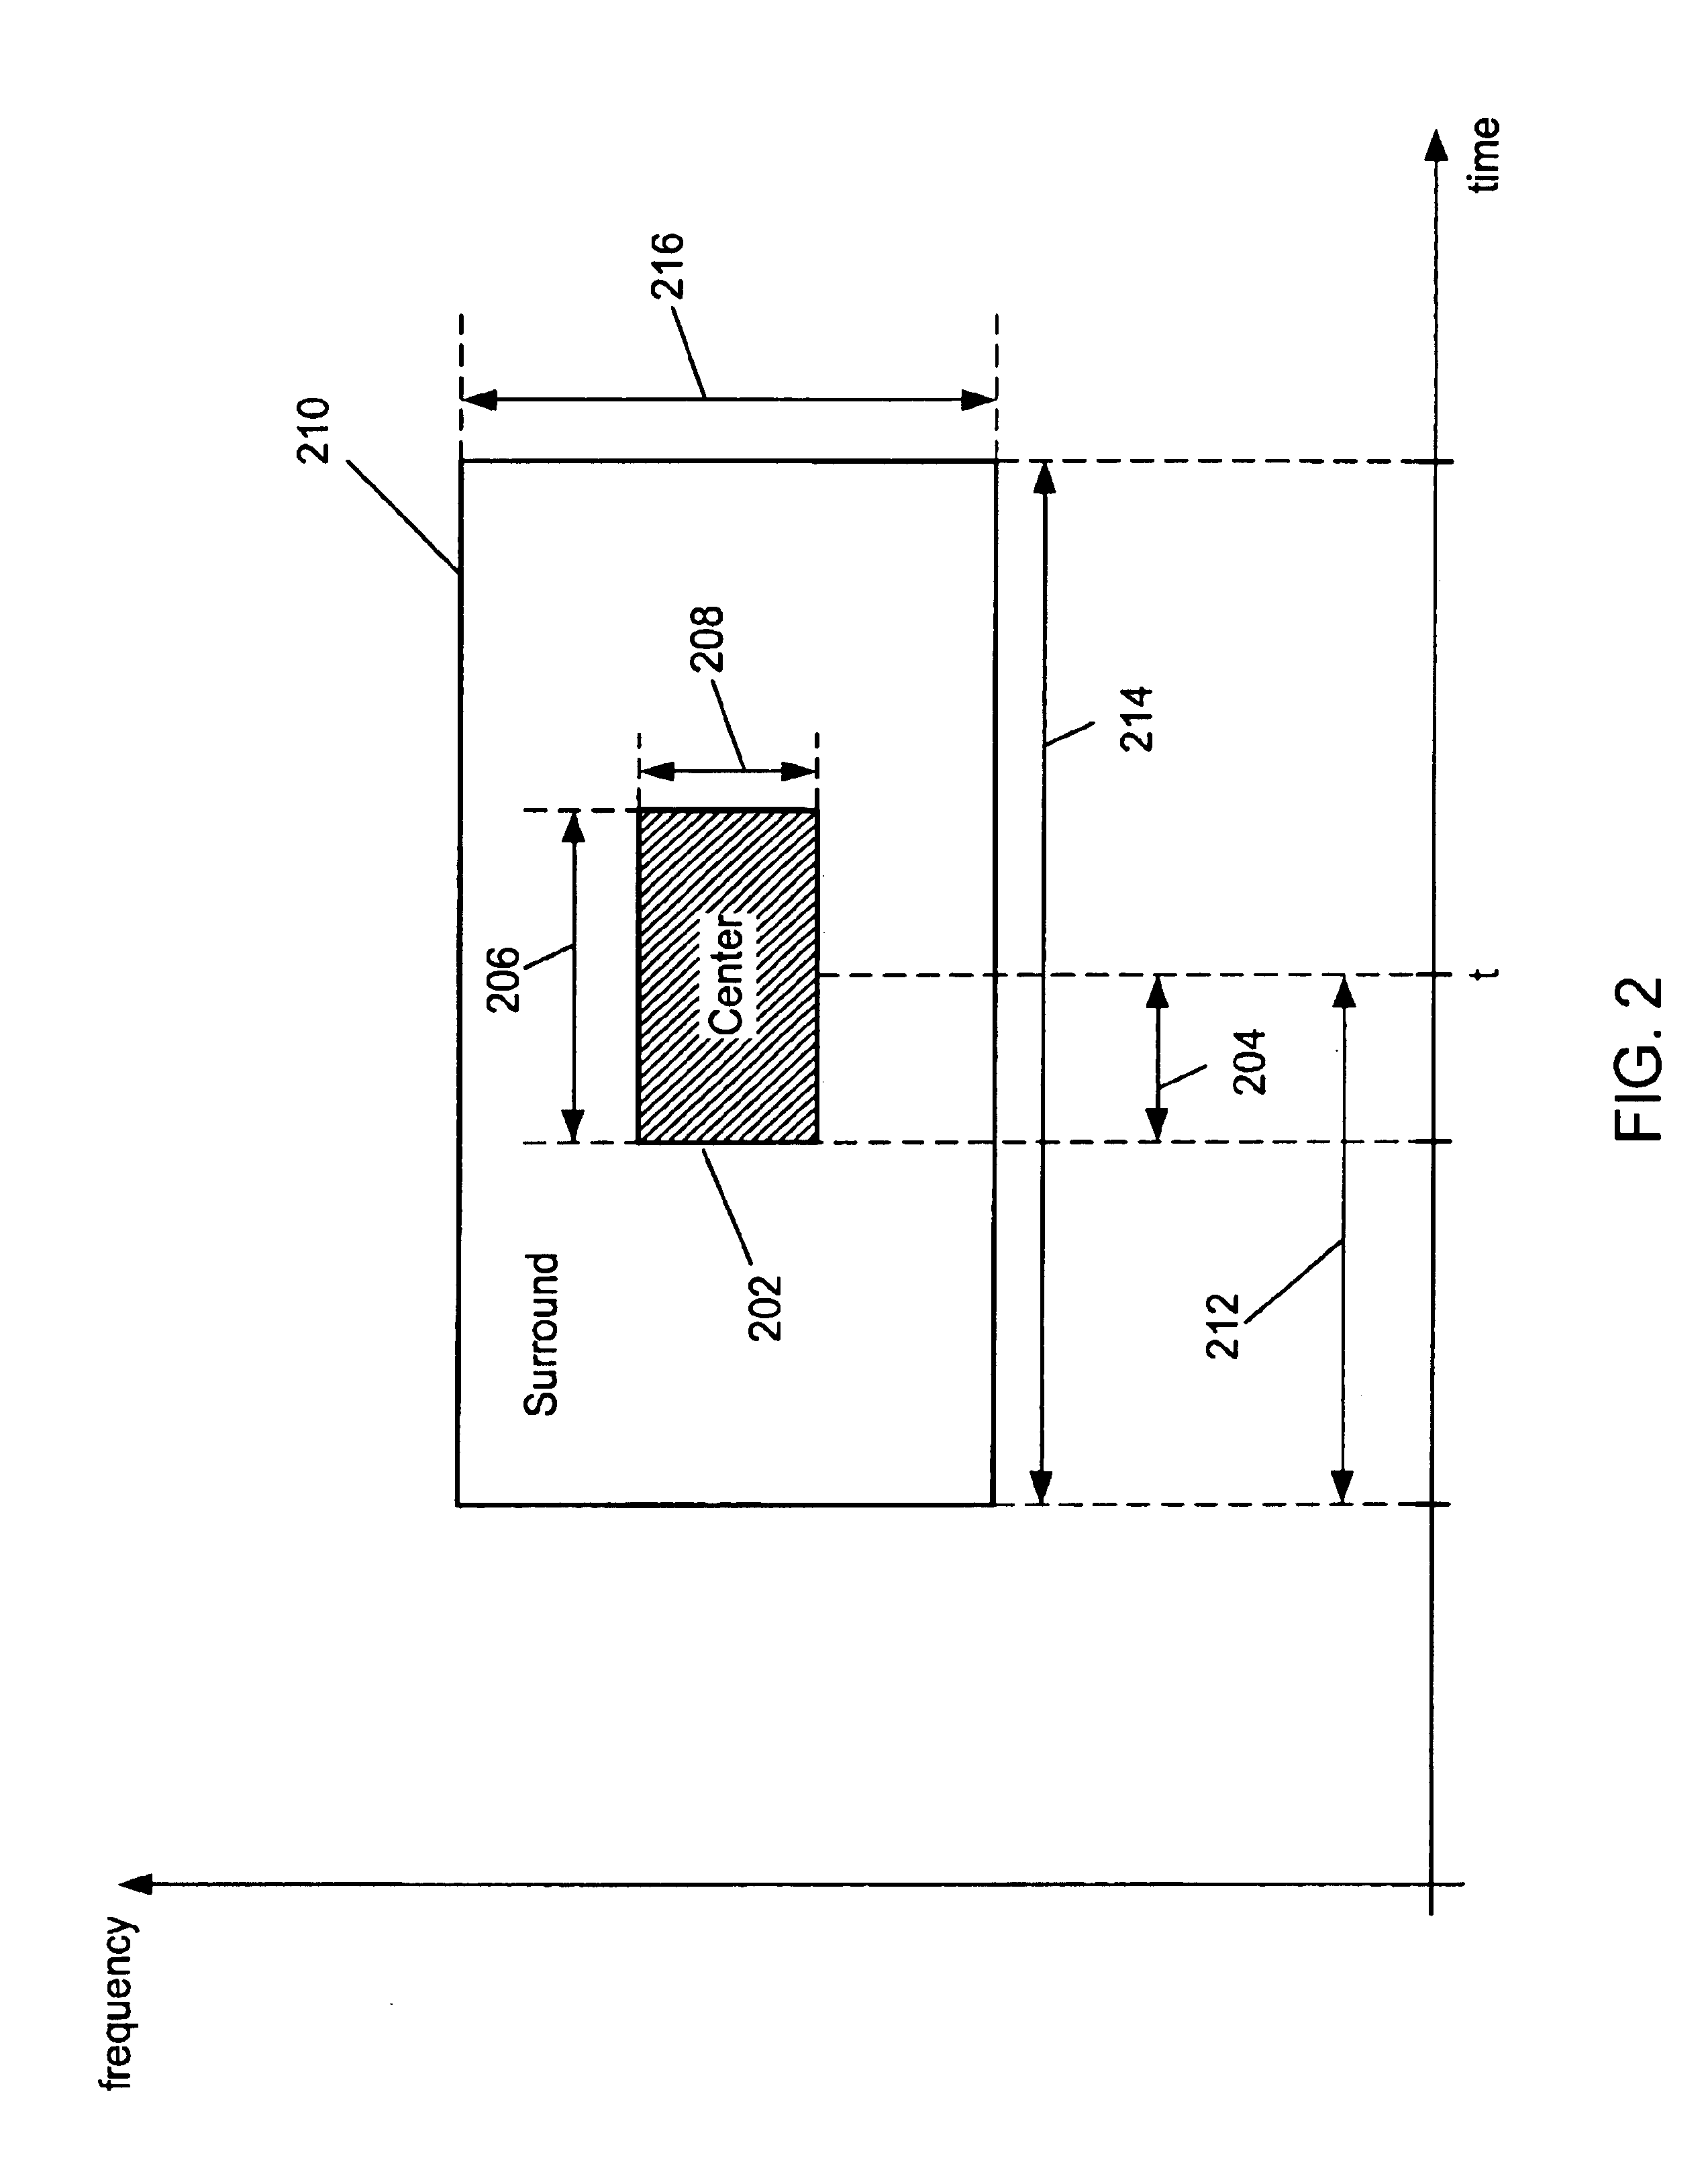 Speech recognition system and method for generating phonotic estimates